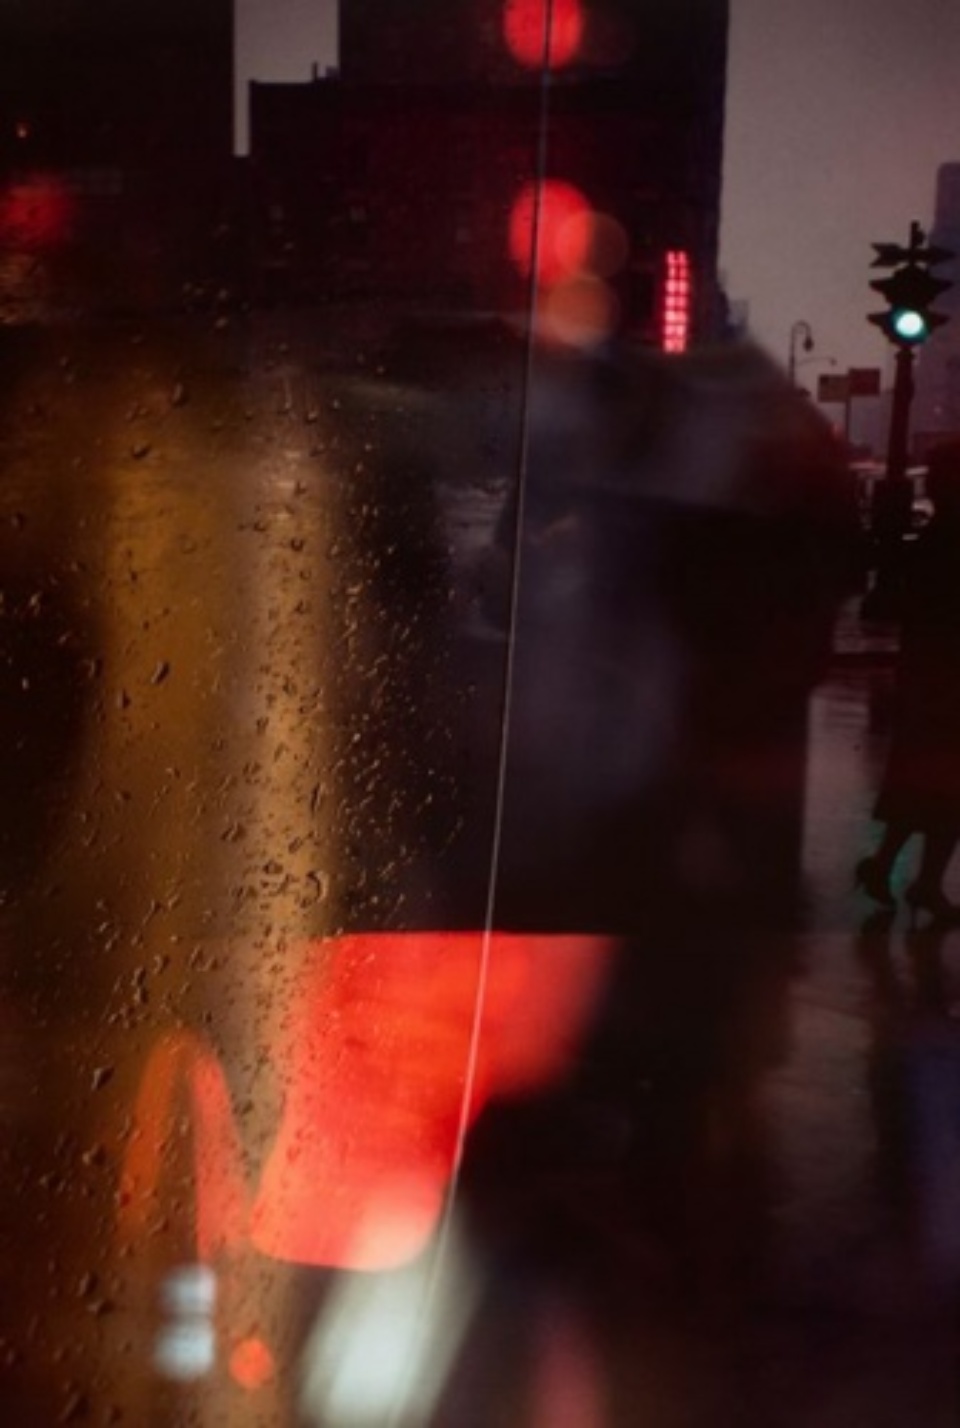 Saul Leiter Walk with Soames 1958 Chromogenic print, printed later Signed on verso 35 x 28 cm